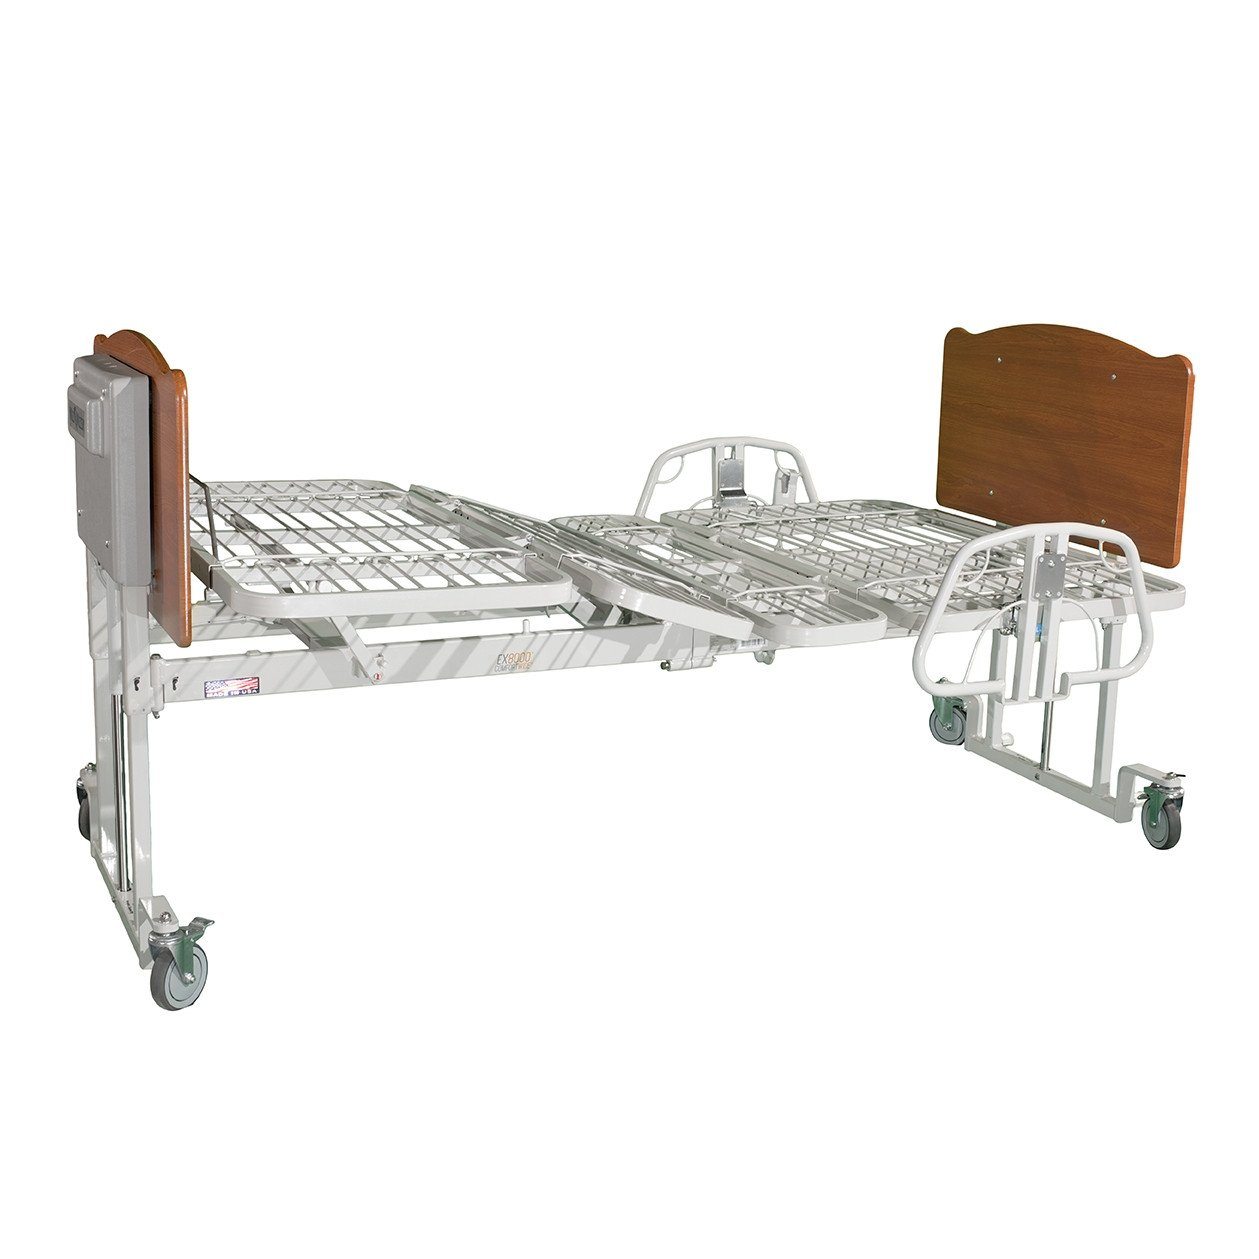 Bariatric Comfort Wide Bed- Expandable from 36" 42" 48"- 800lb Weight Limit" - Wound Care Mattress